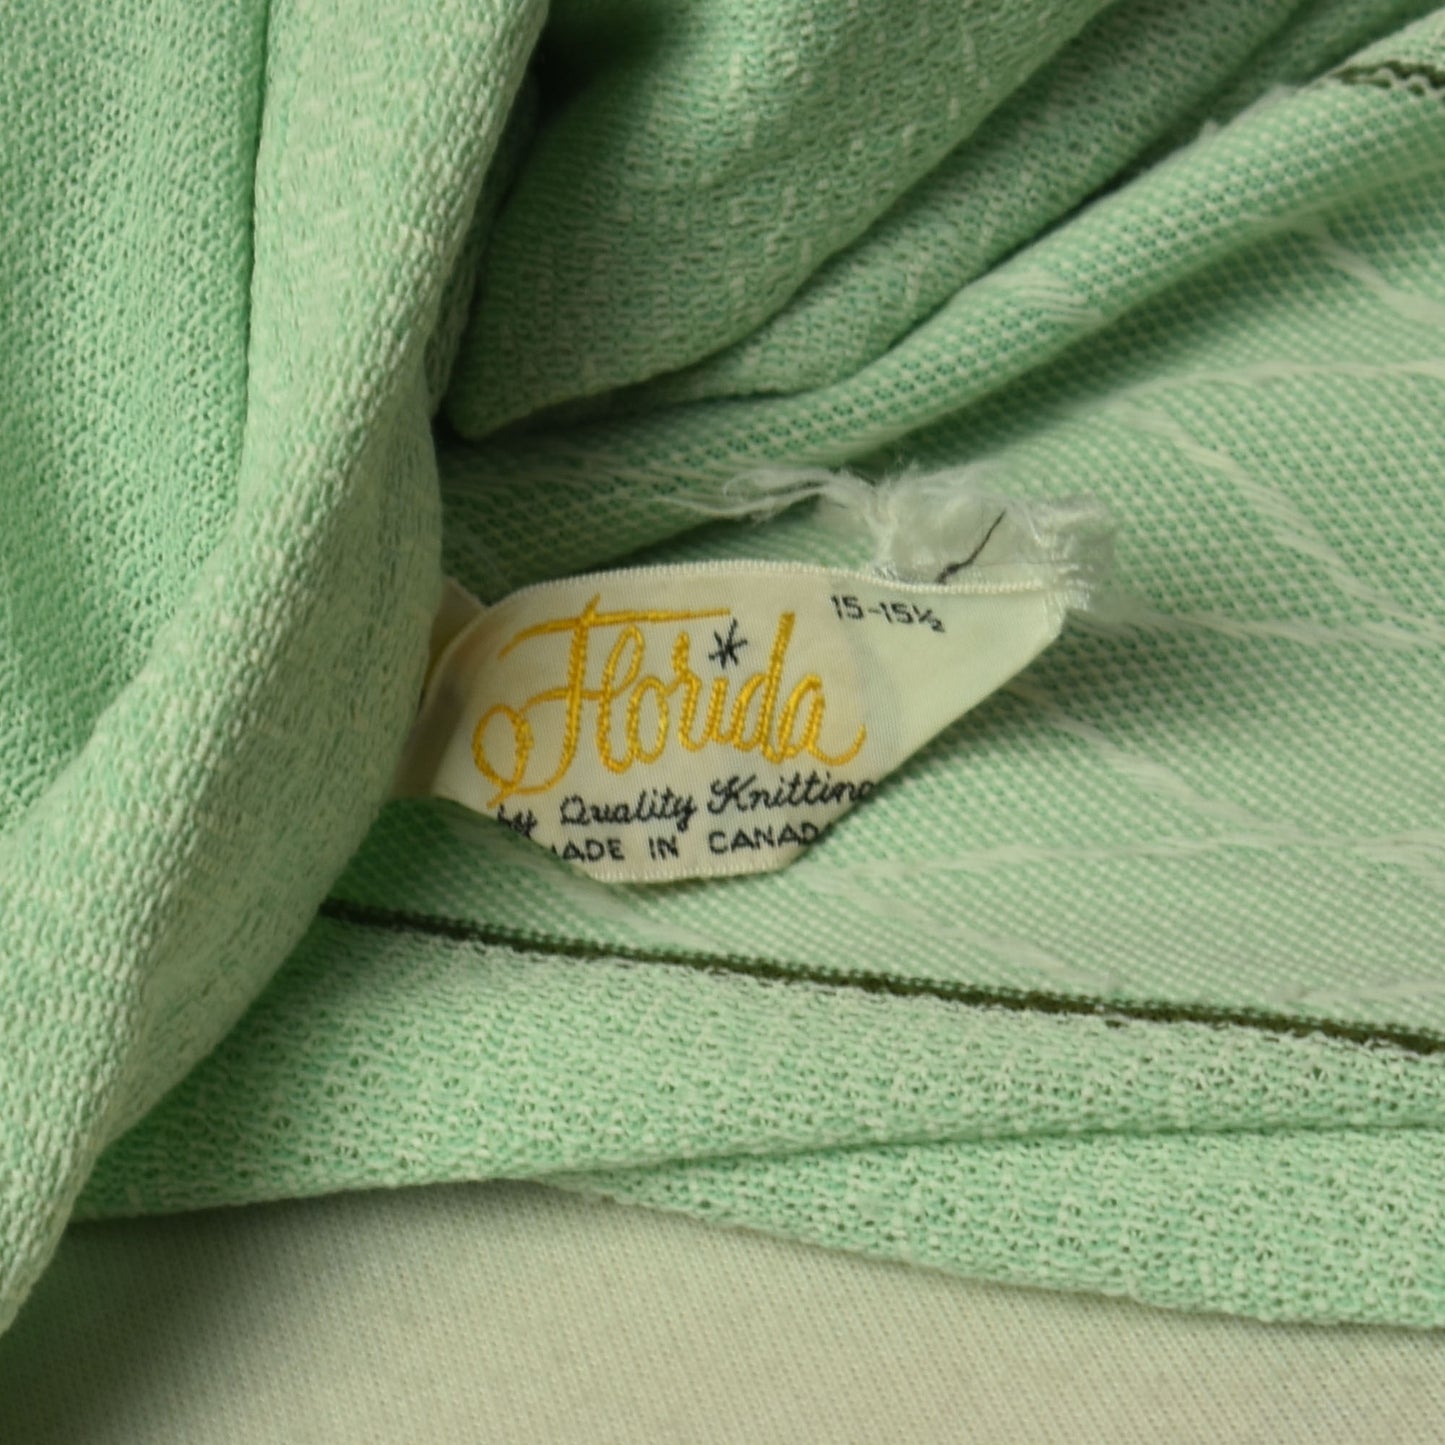 Vintage 50s Florida Knitted Made in Canada Men's Shirt - Size M - Mint Green